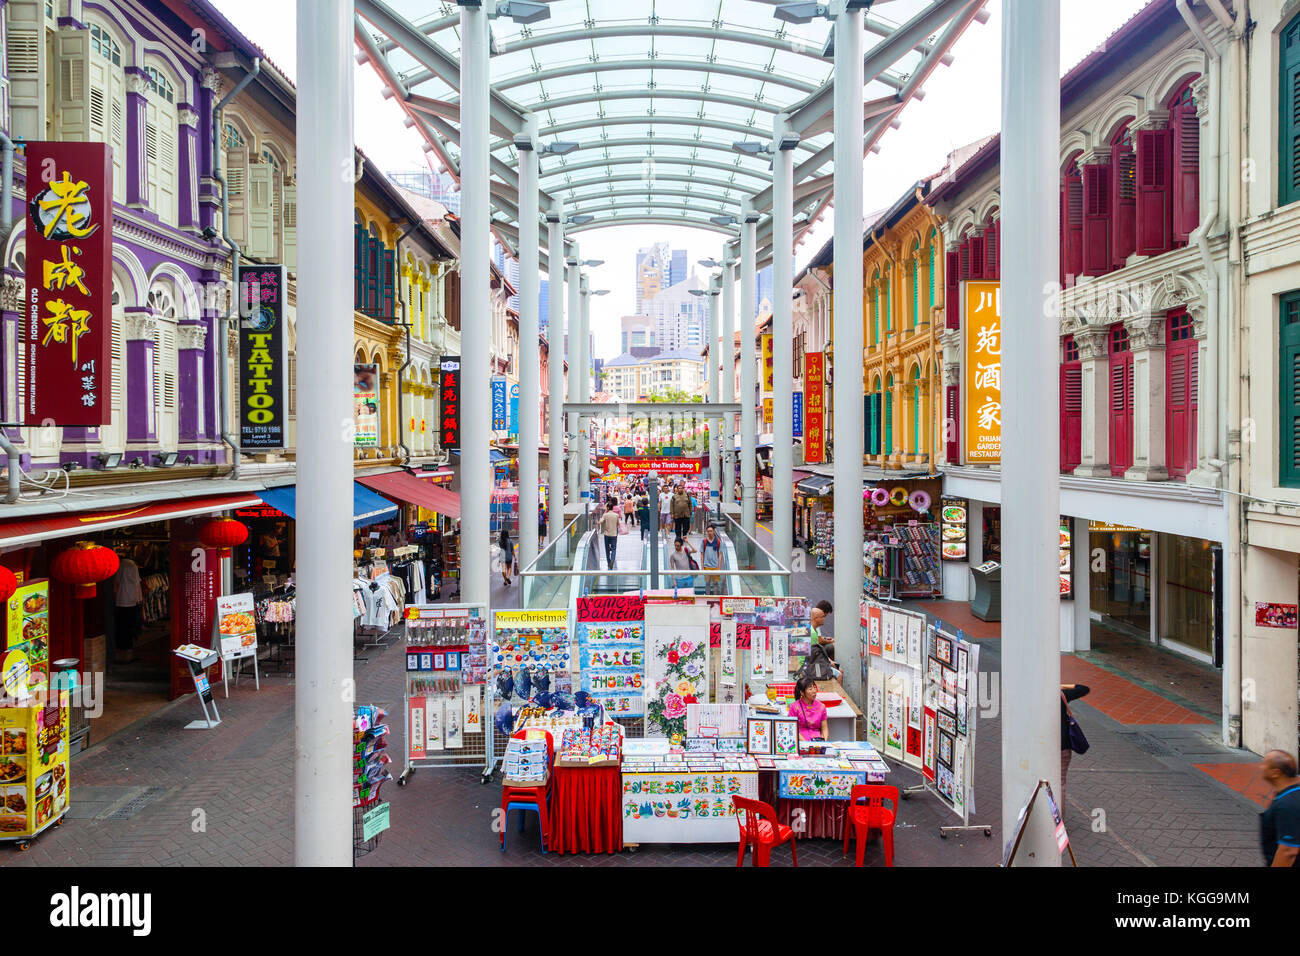 SINGAPORE - DEC. 15, 2014: Visitors shopping at Chinatown's Pagoda Street where low-rise colorful Baroque-Victorian architecture style shophouses from Stock Photo